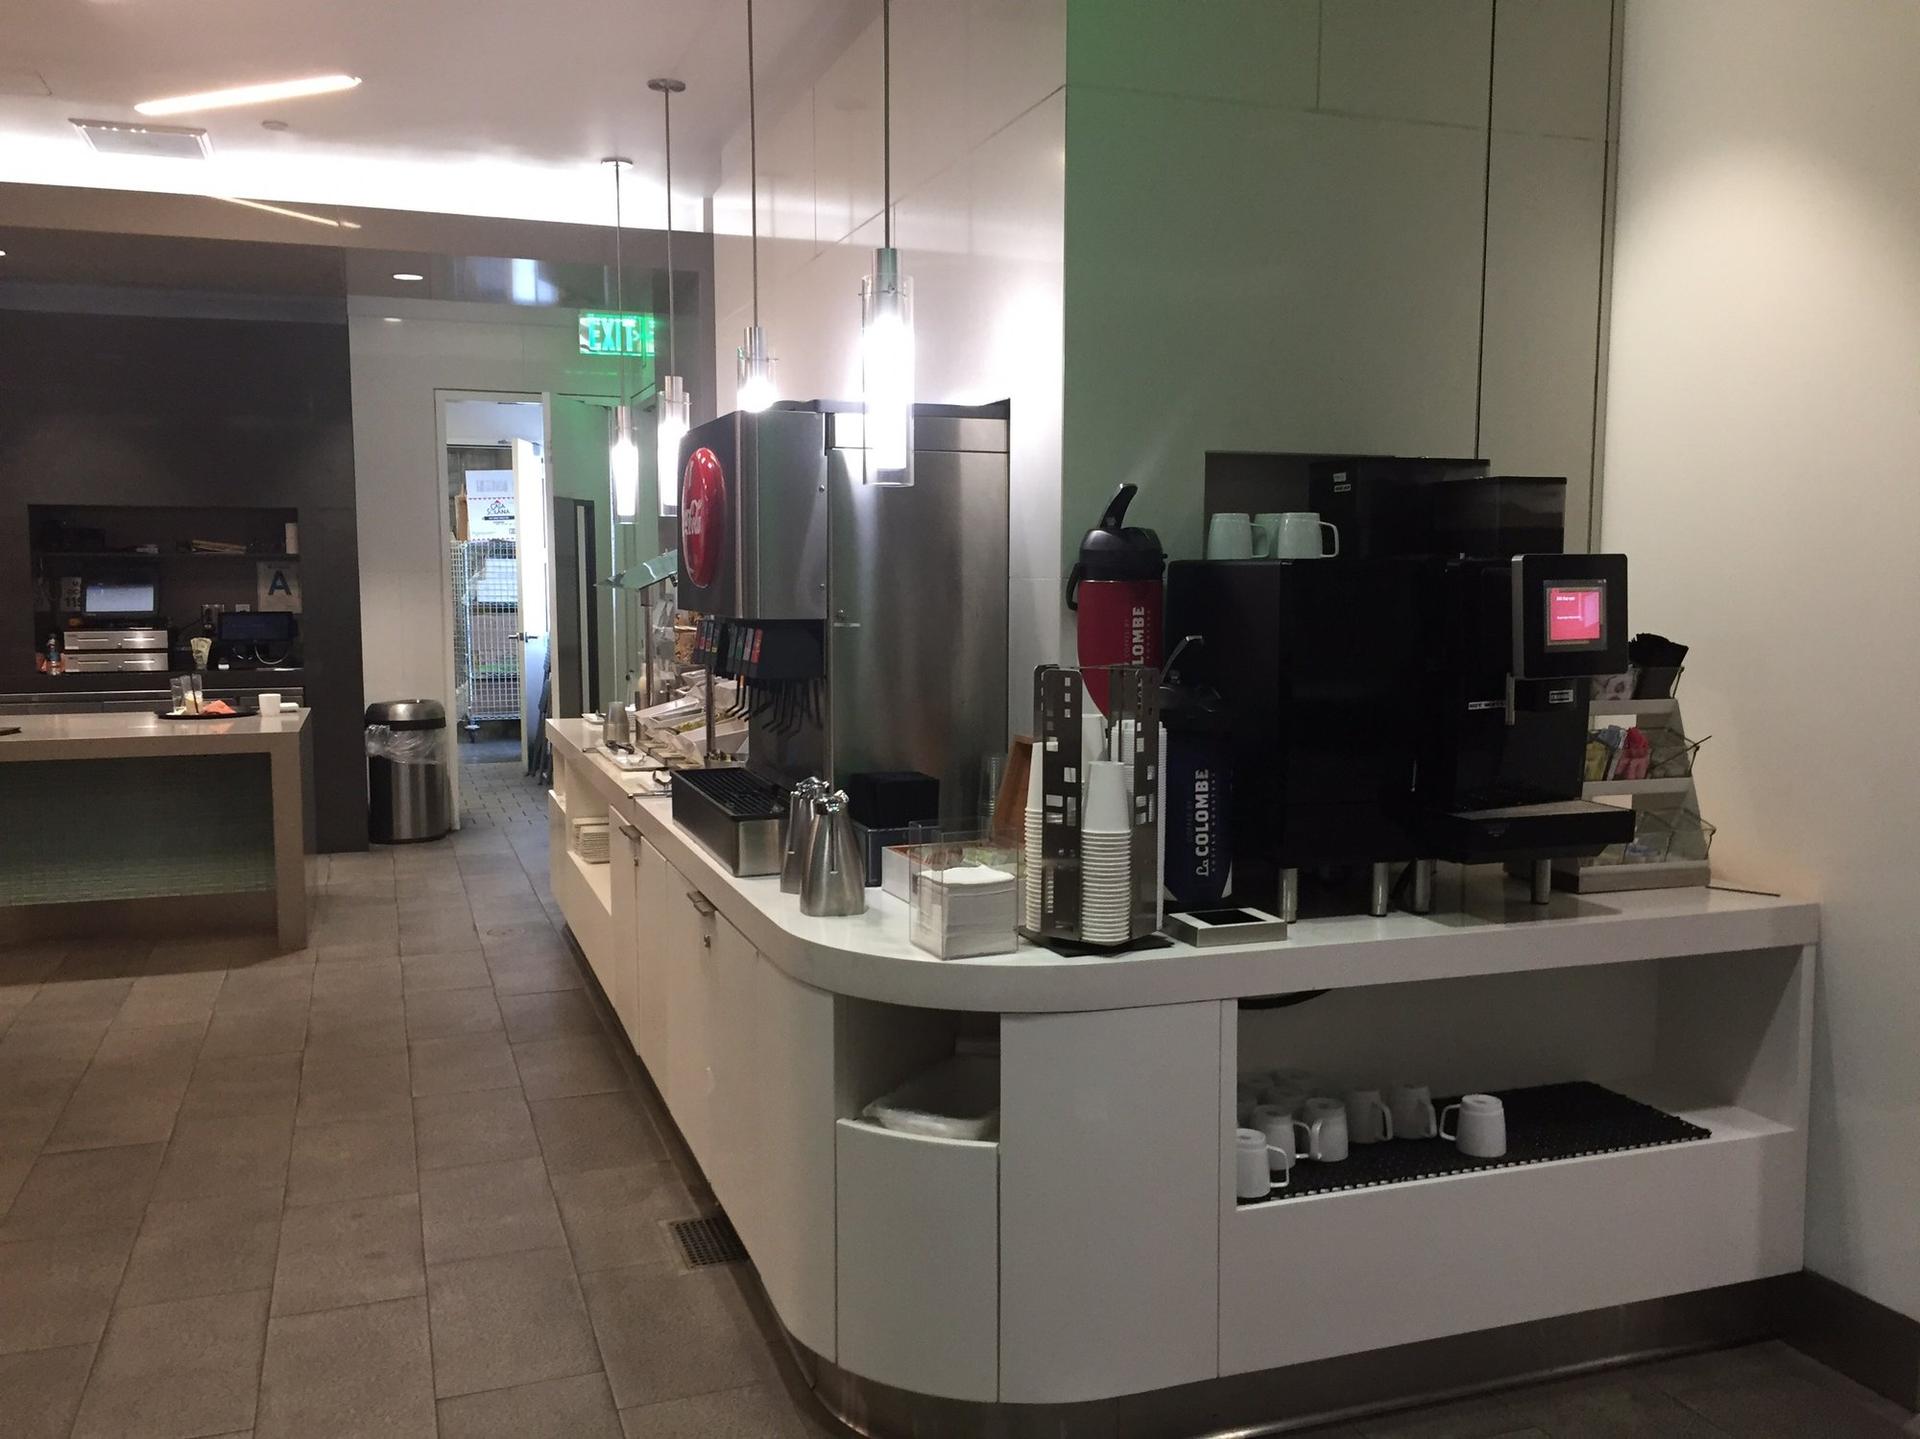 American Airlines Admirals Club image 32 of 43